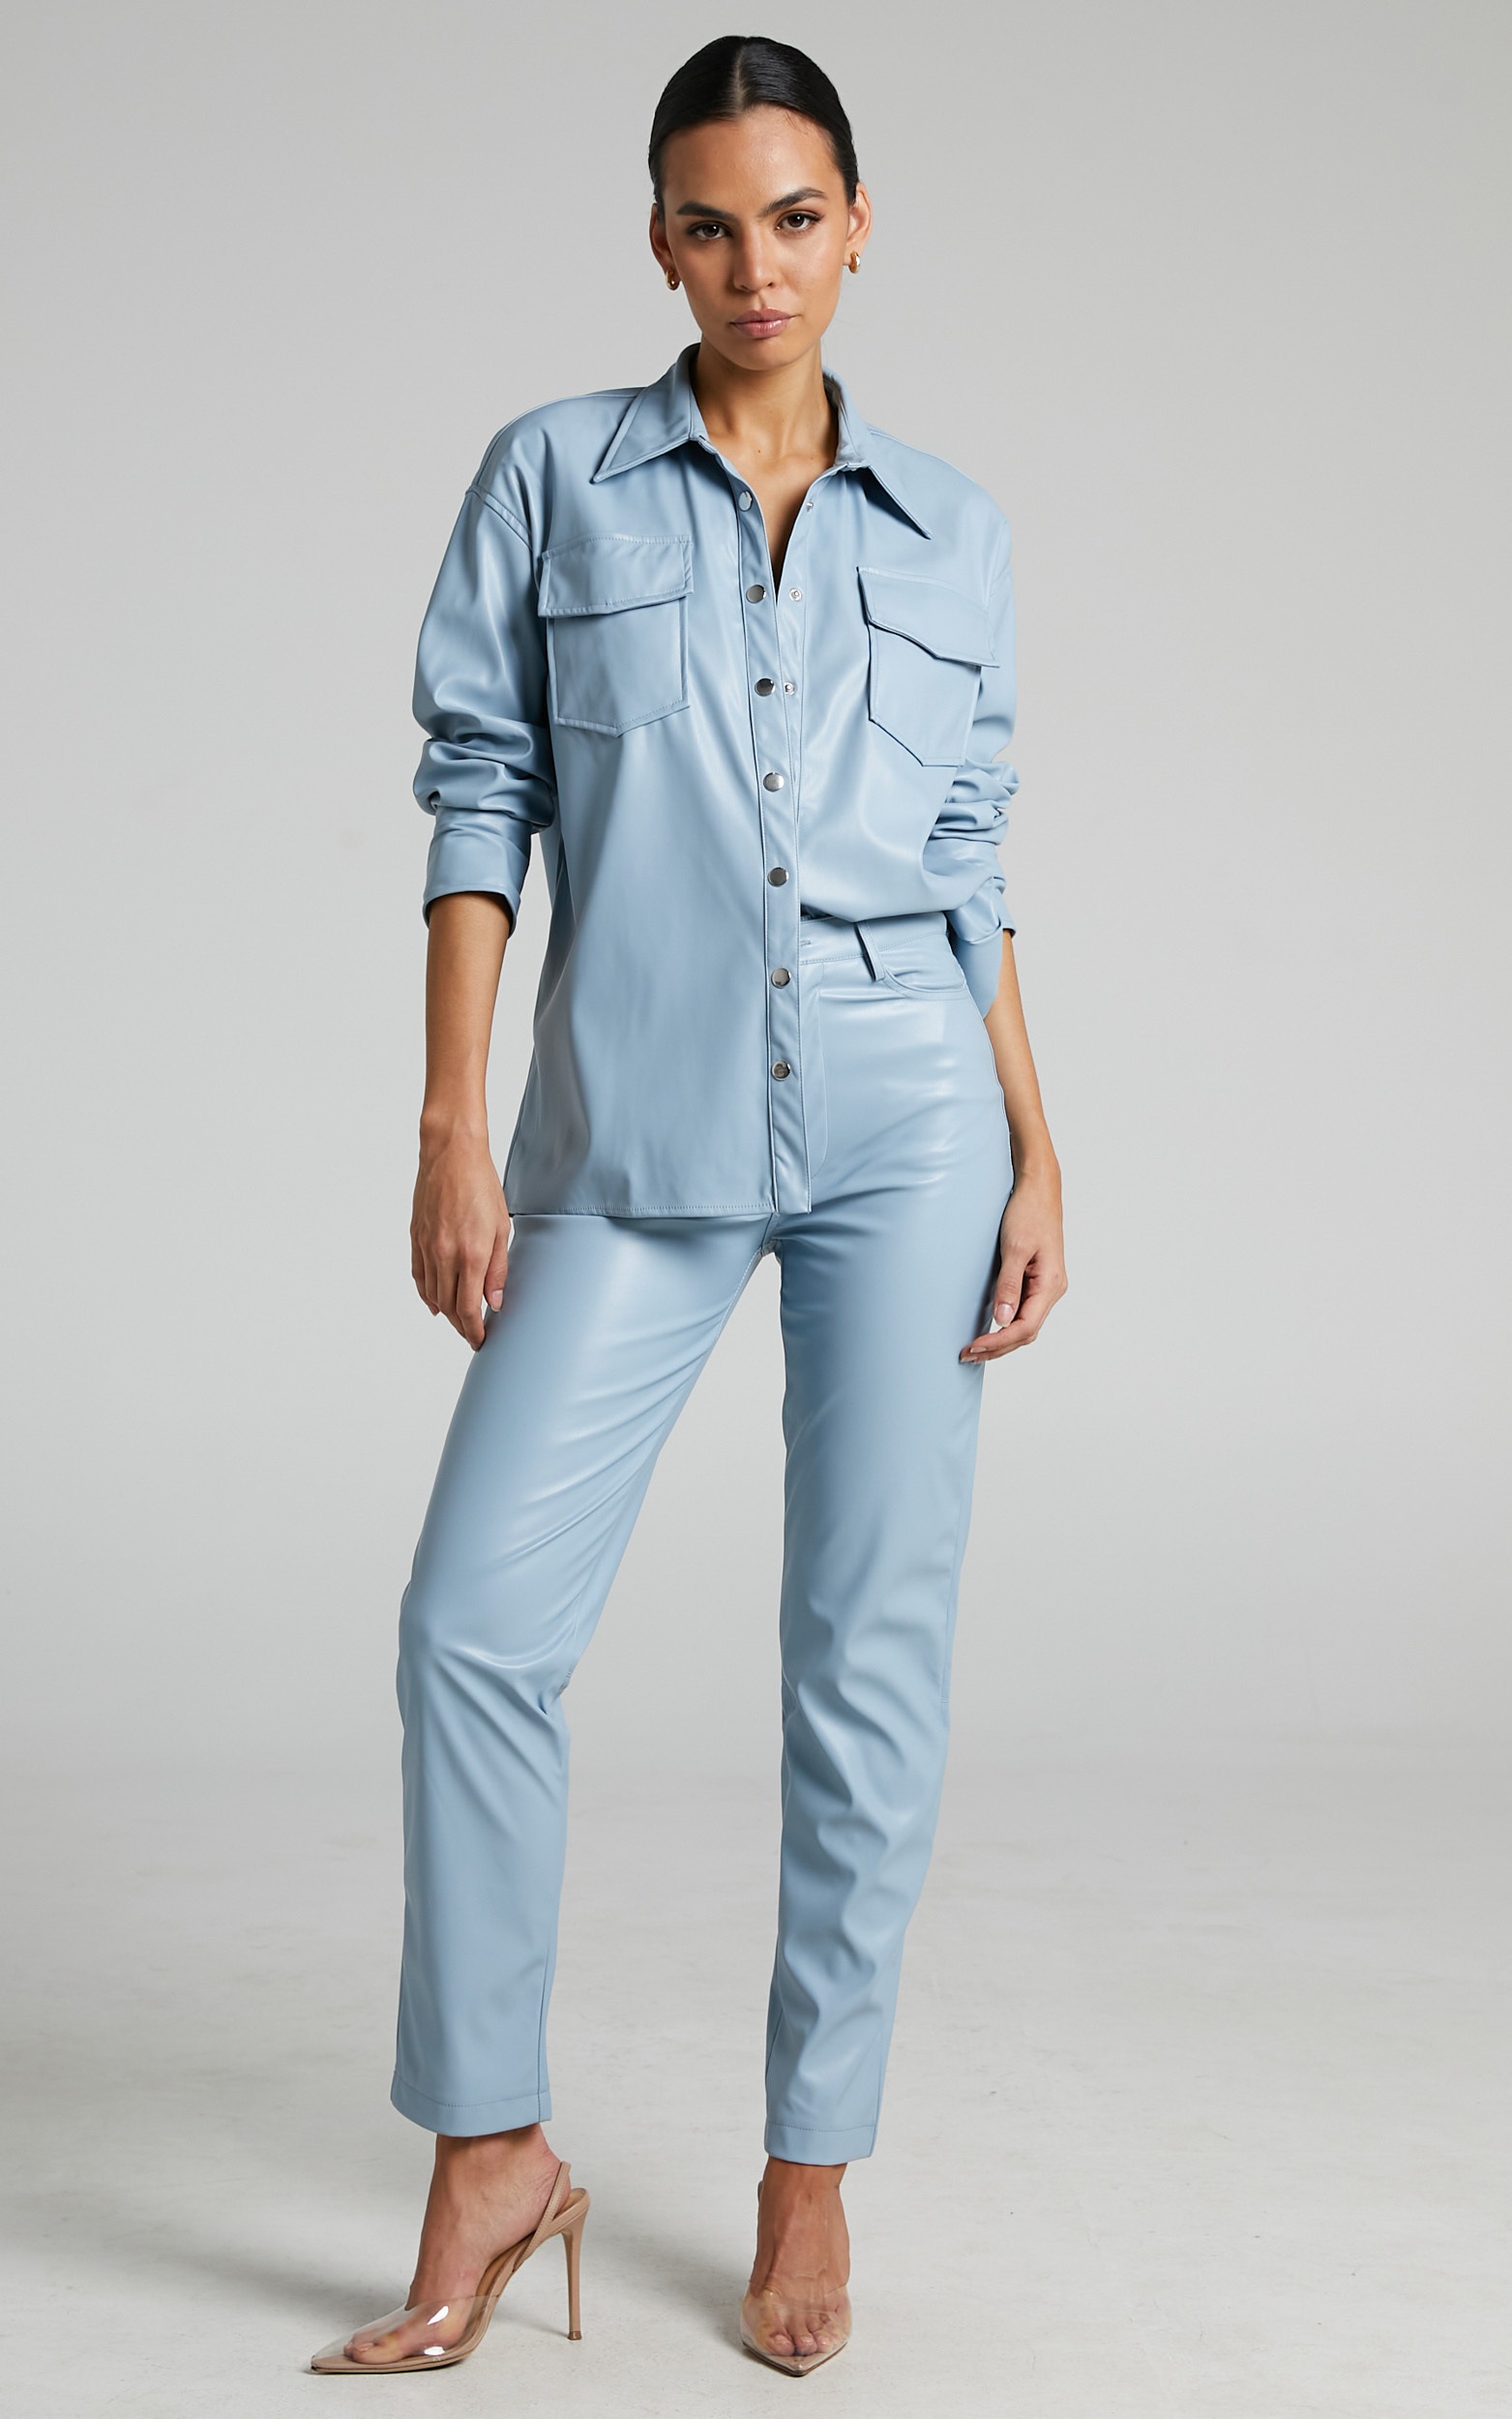 Selenia Button Front PU Shirt in Blue - 04, BLU1, hi-res image number null